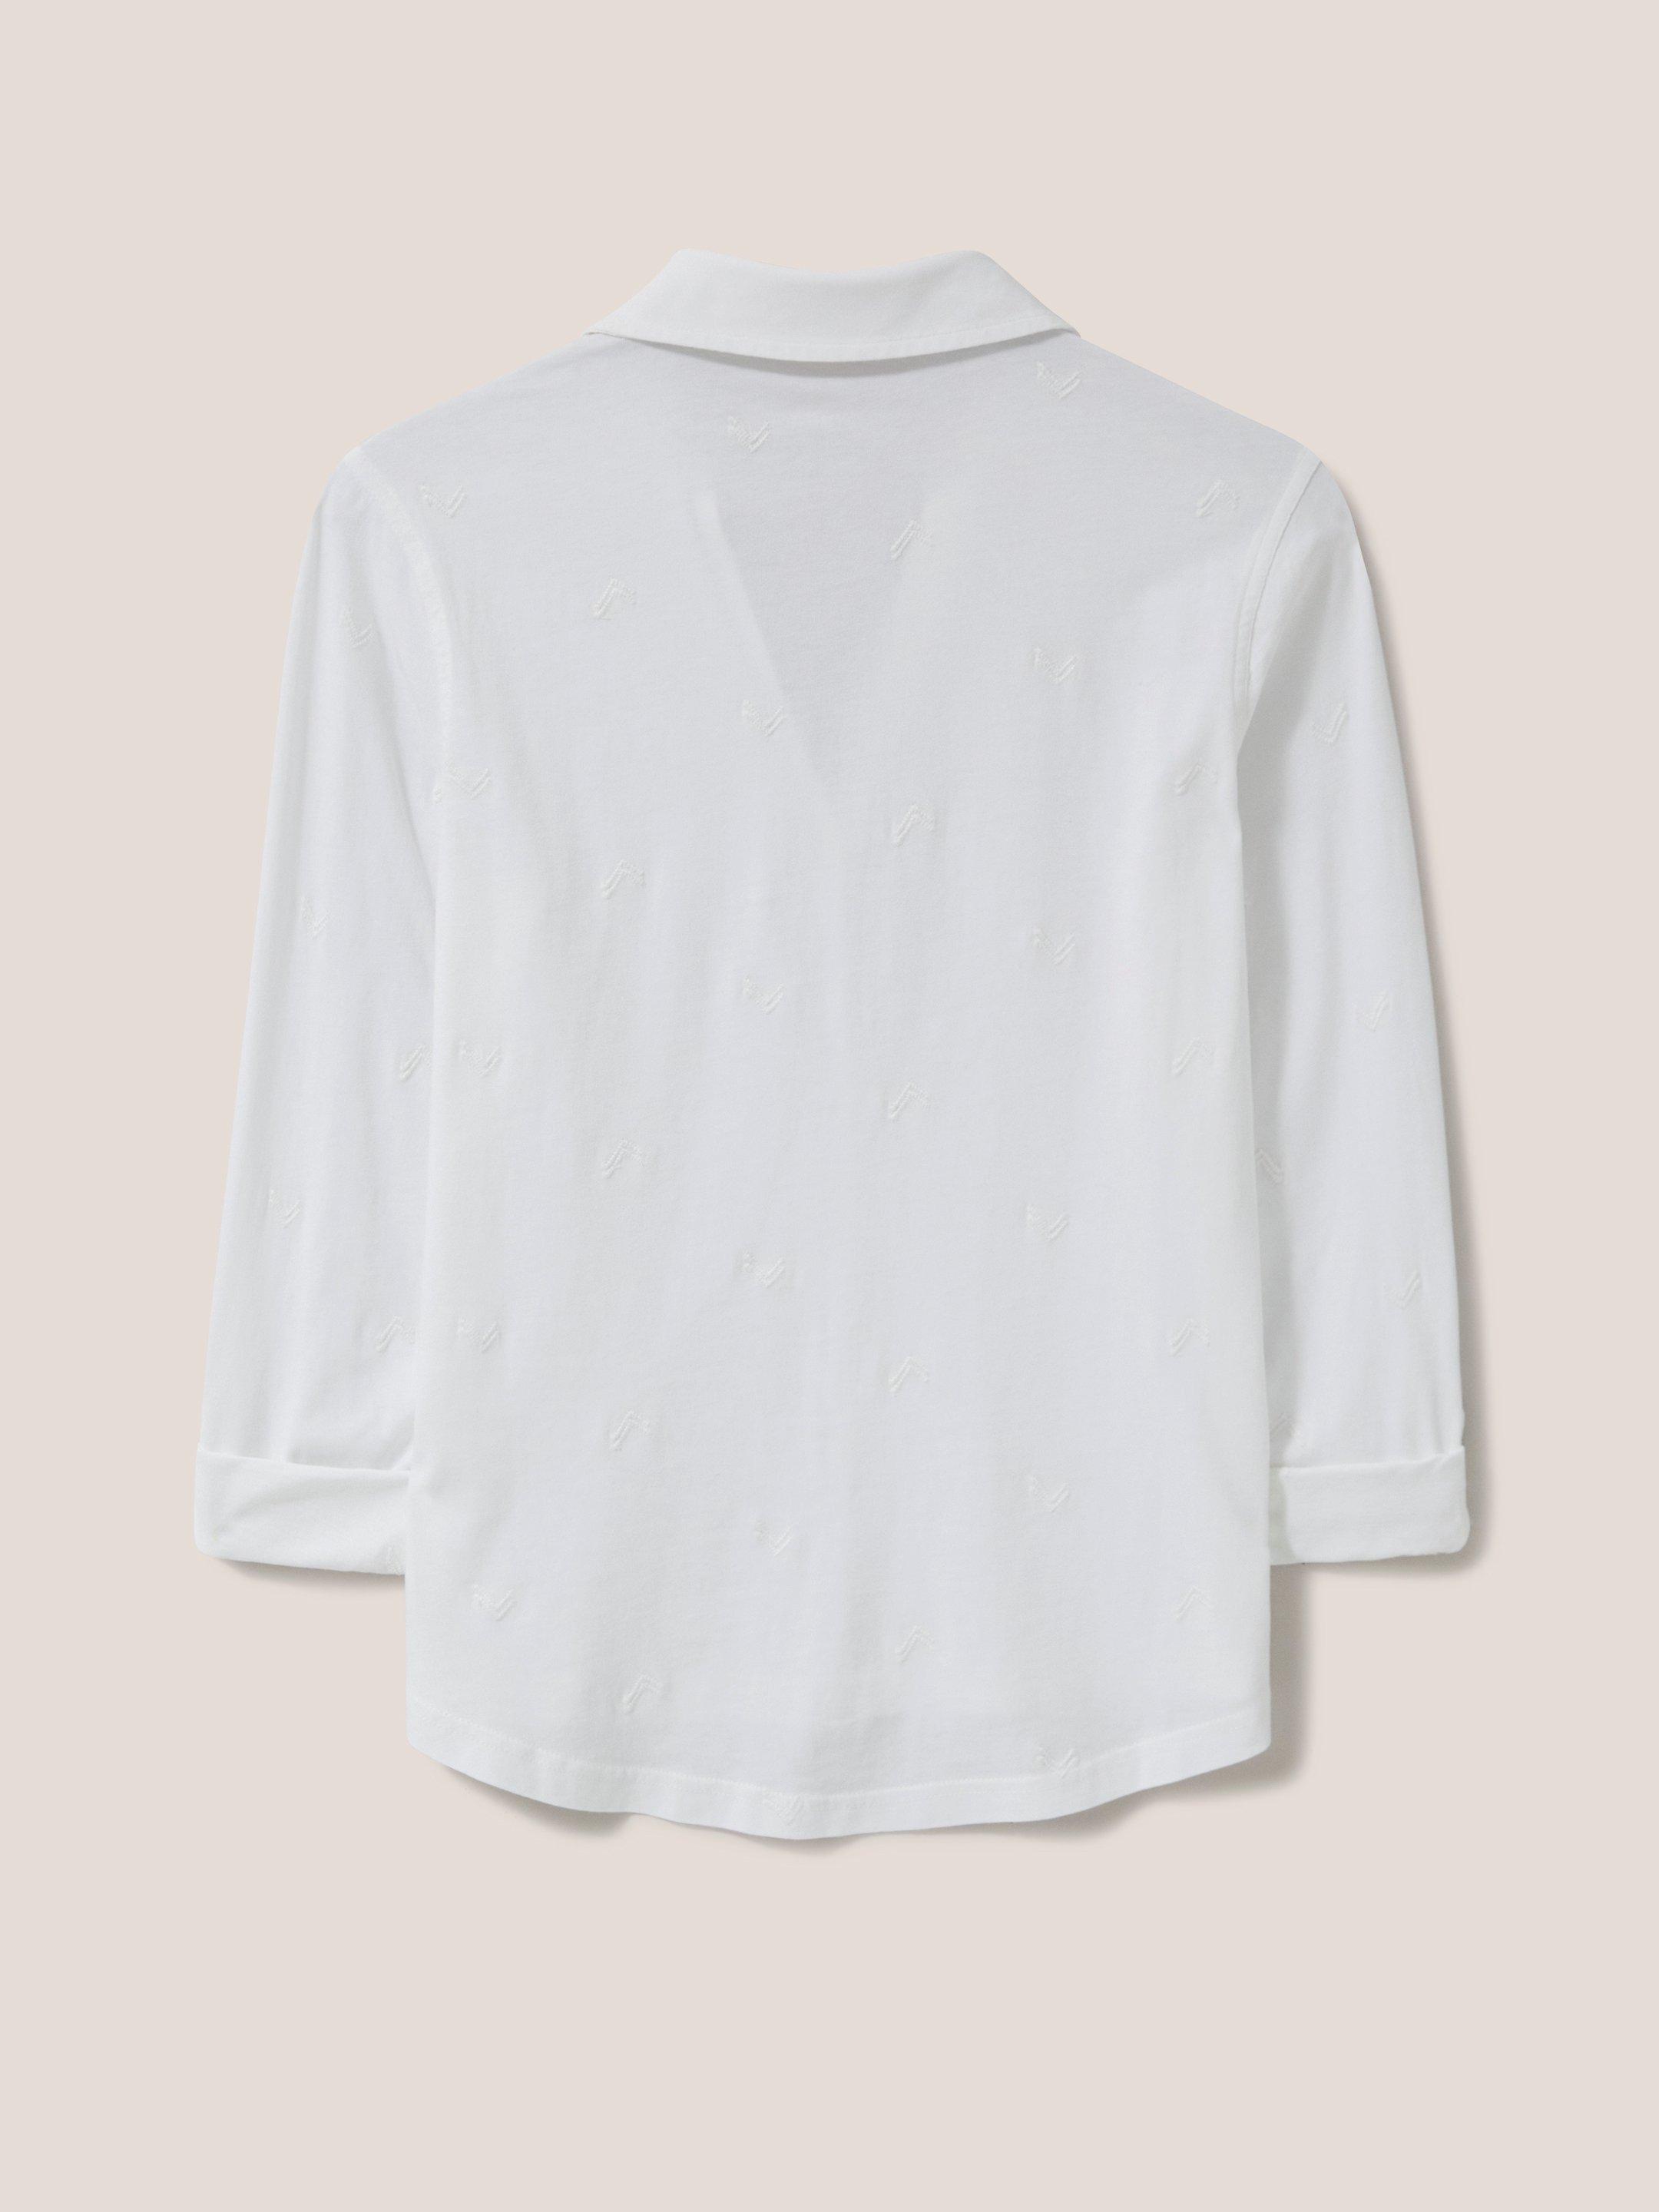 ANNIE EMBROIDERED JERSEY SHIRT in BRIL WHITE - FLAT BACK